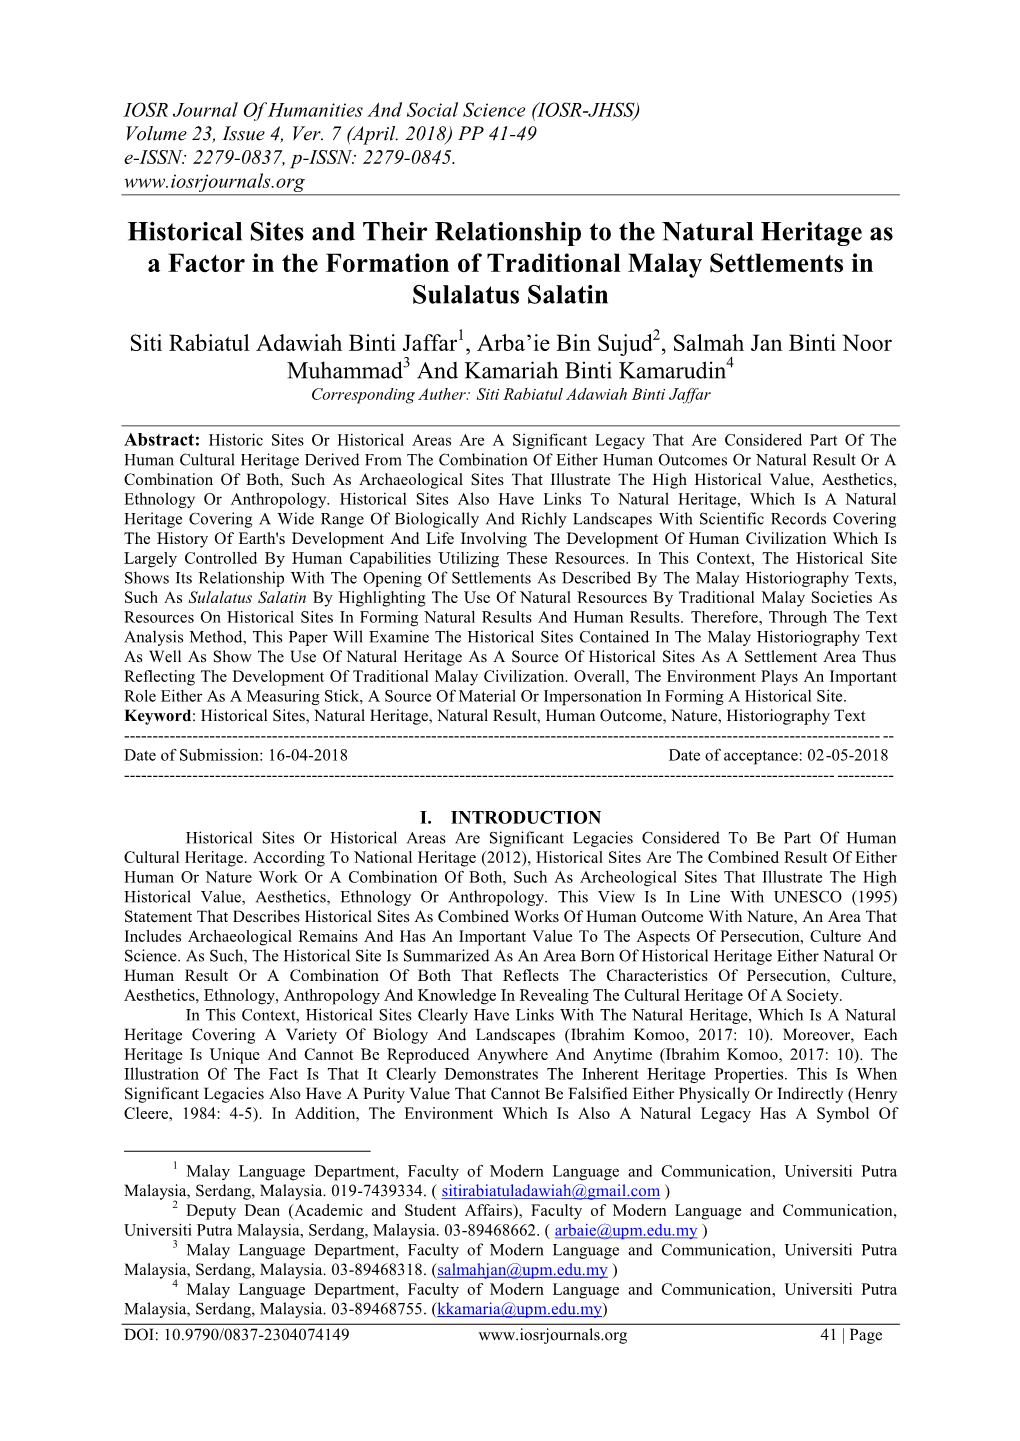 Historical Sites and Their Relationship to the Natural Heritage As a Factor in the Formation of Traditional Malay Settlements in Sulalatus Salatin